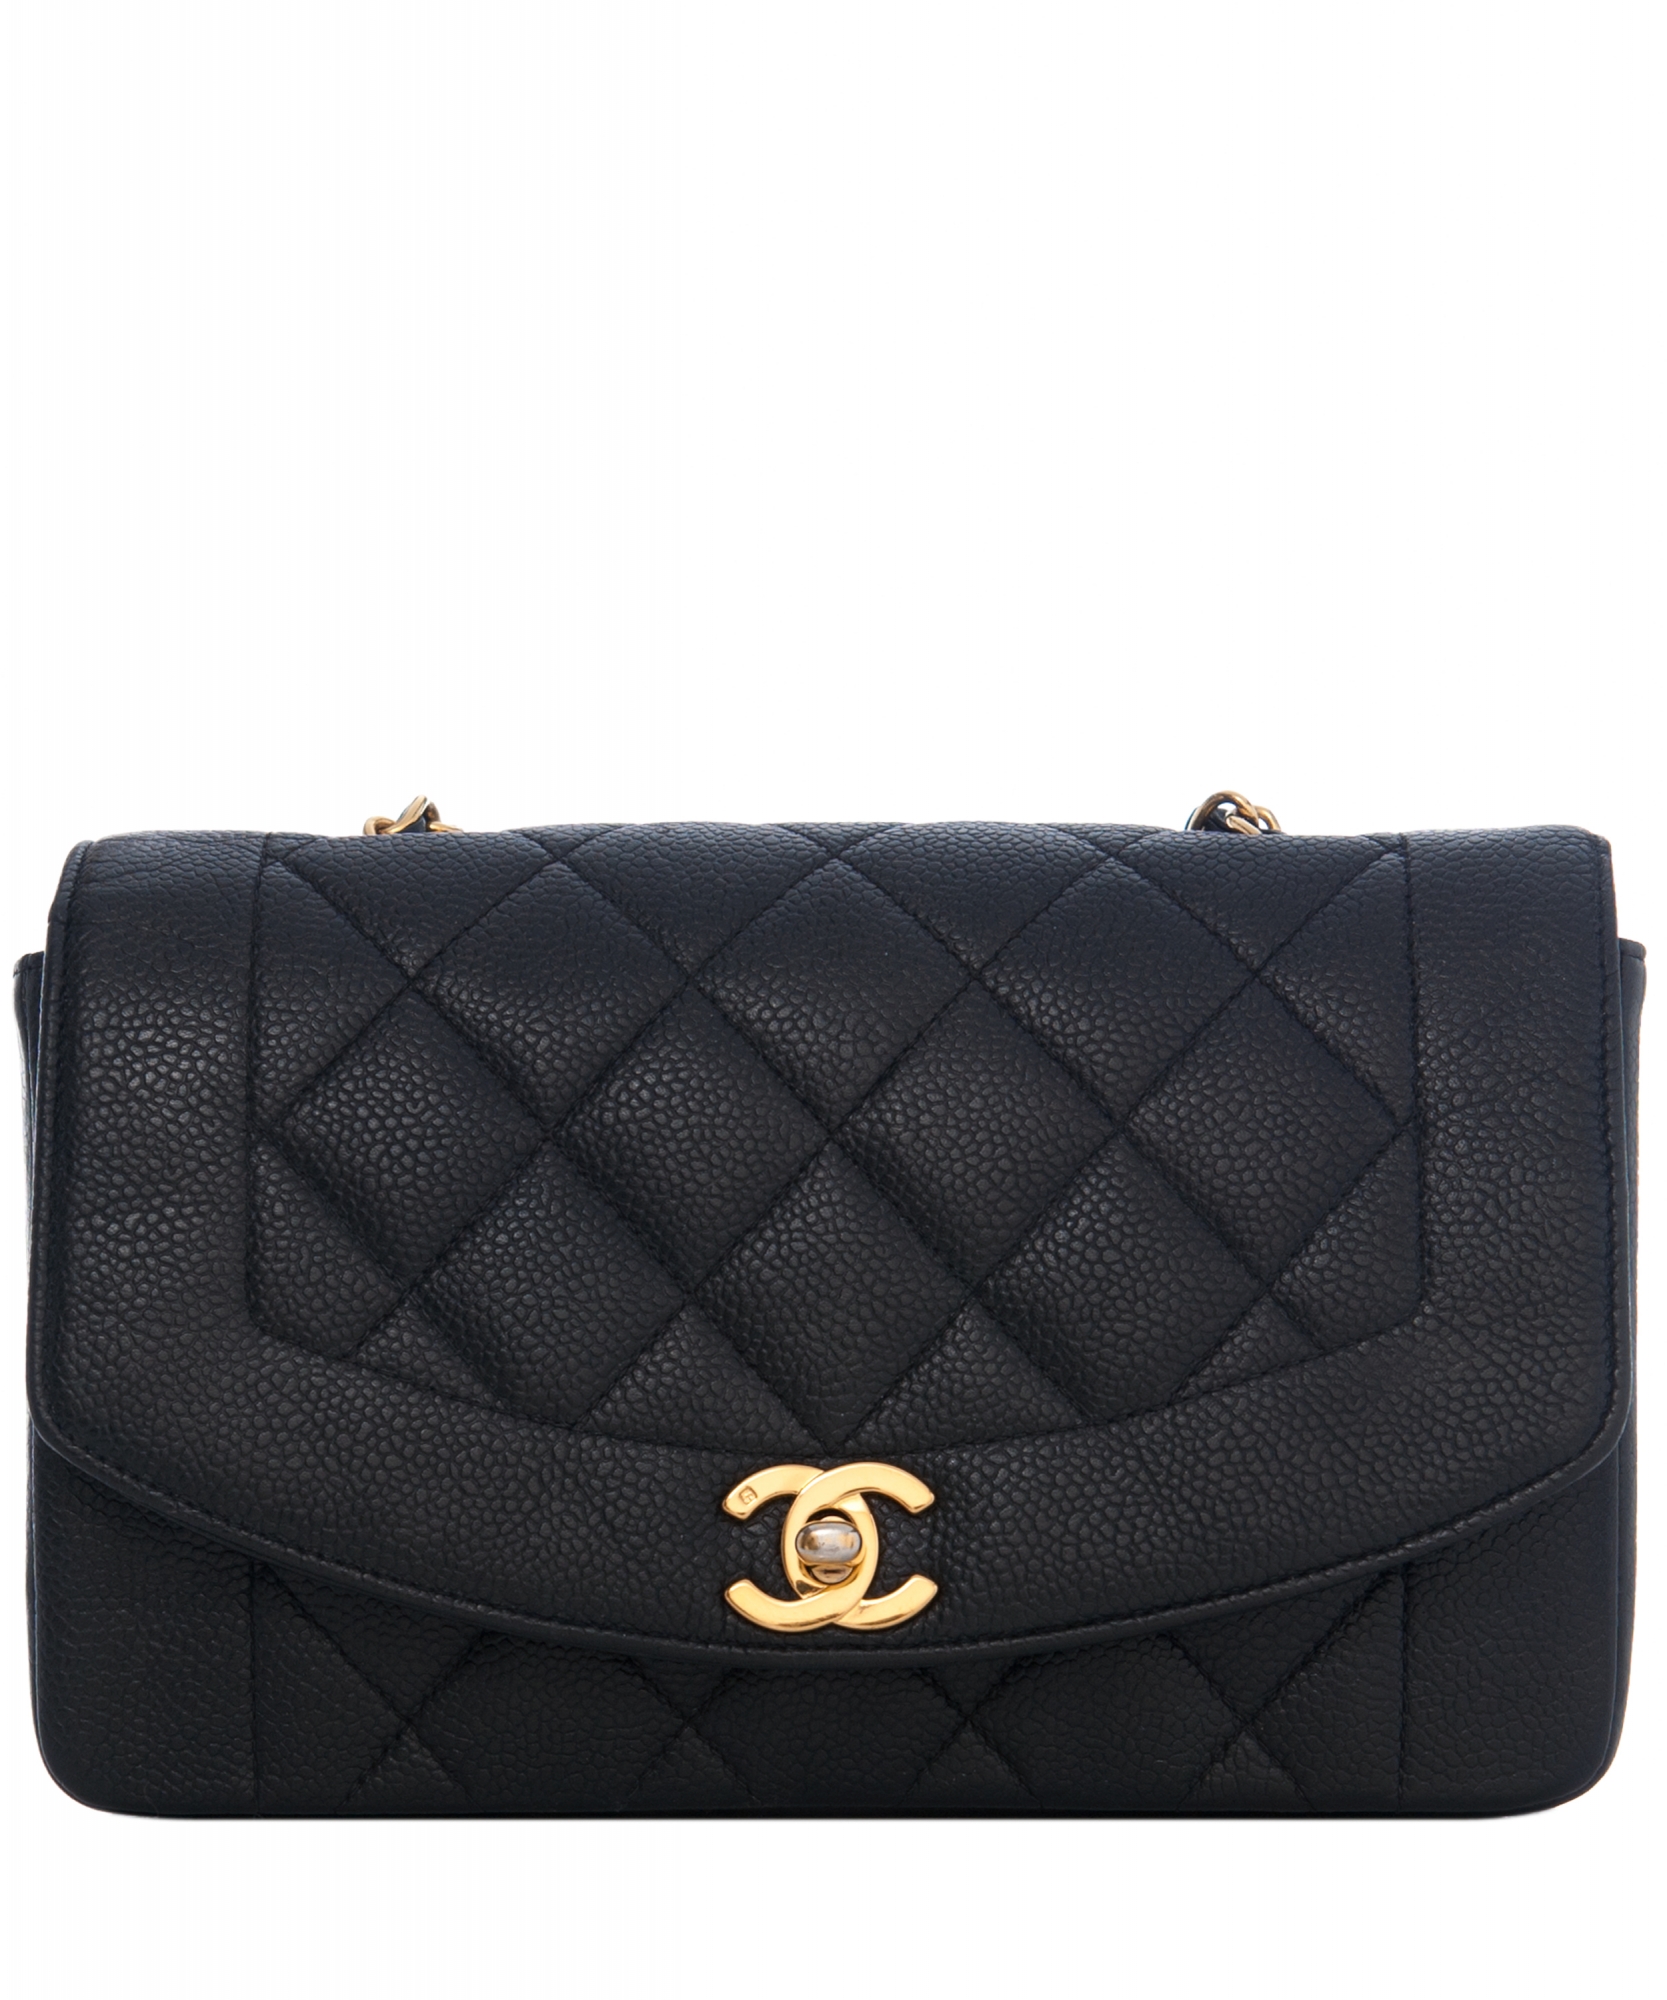 Chanel Flap Bag in Black Matelasse Caviar Leather - Chanel